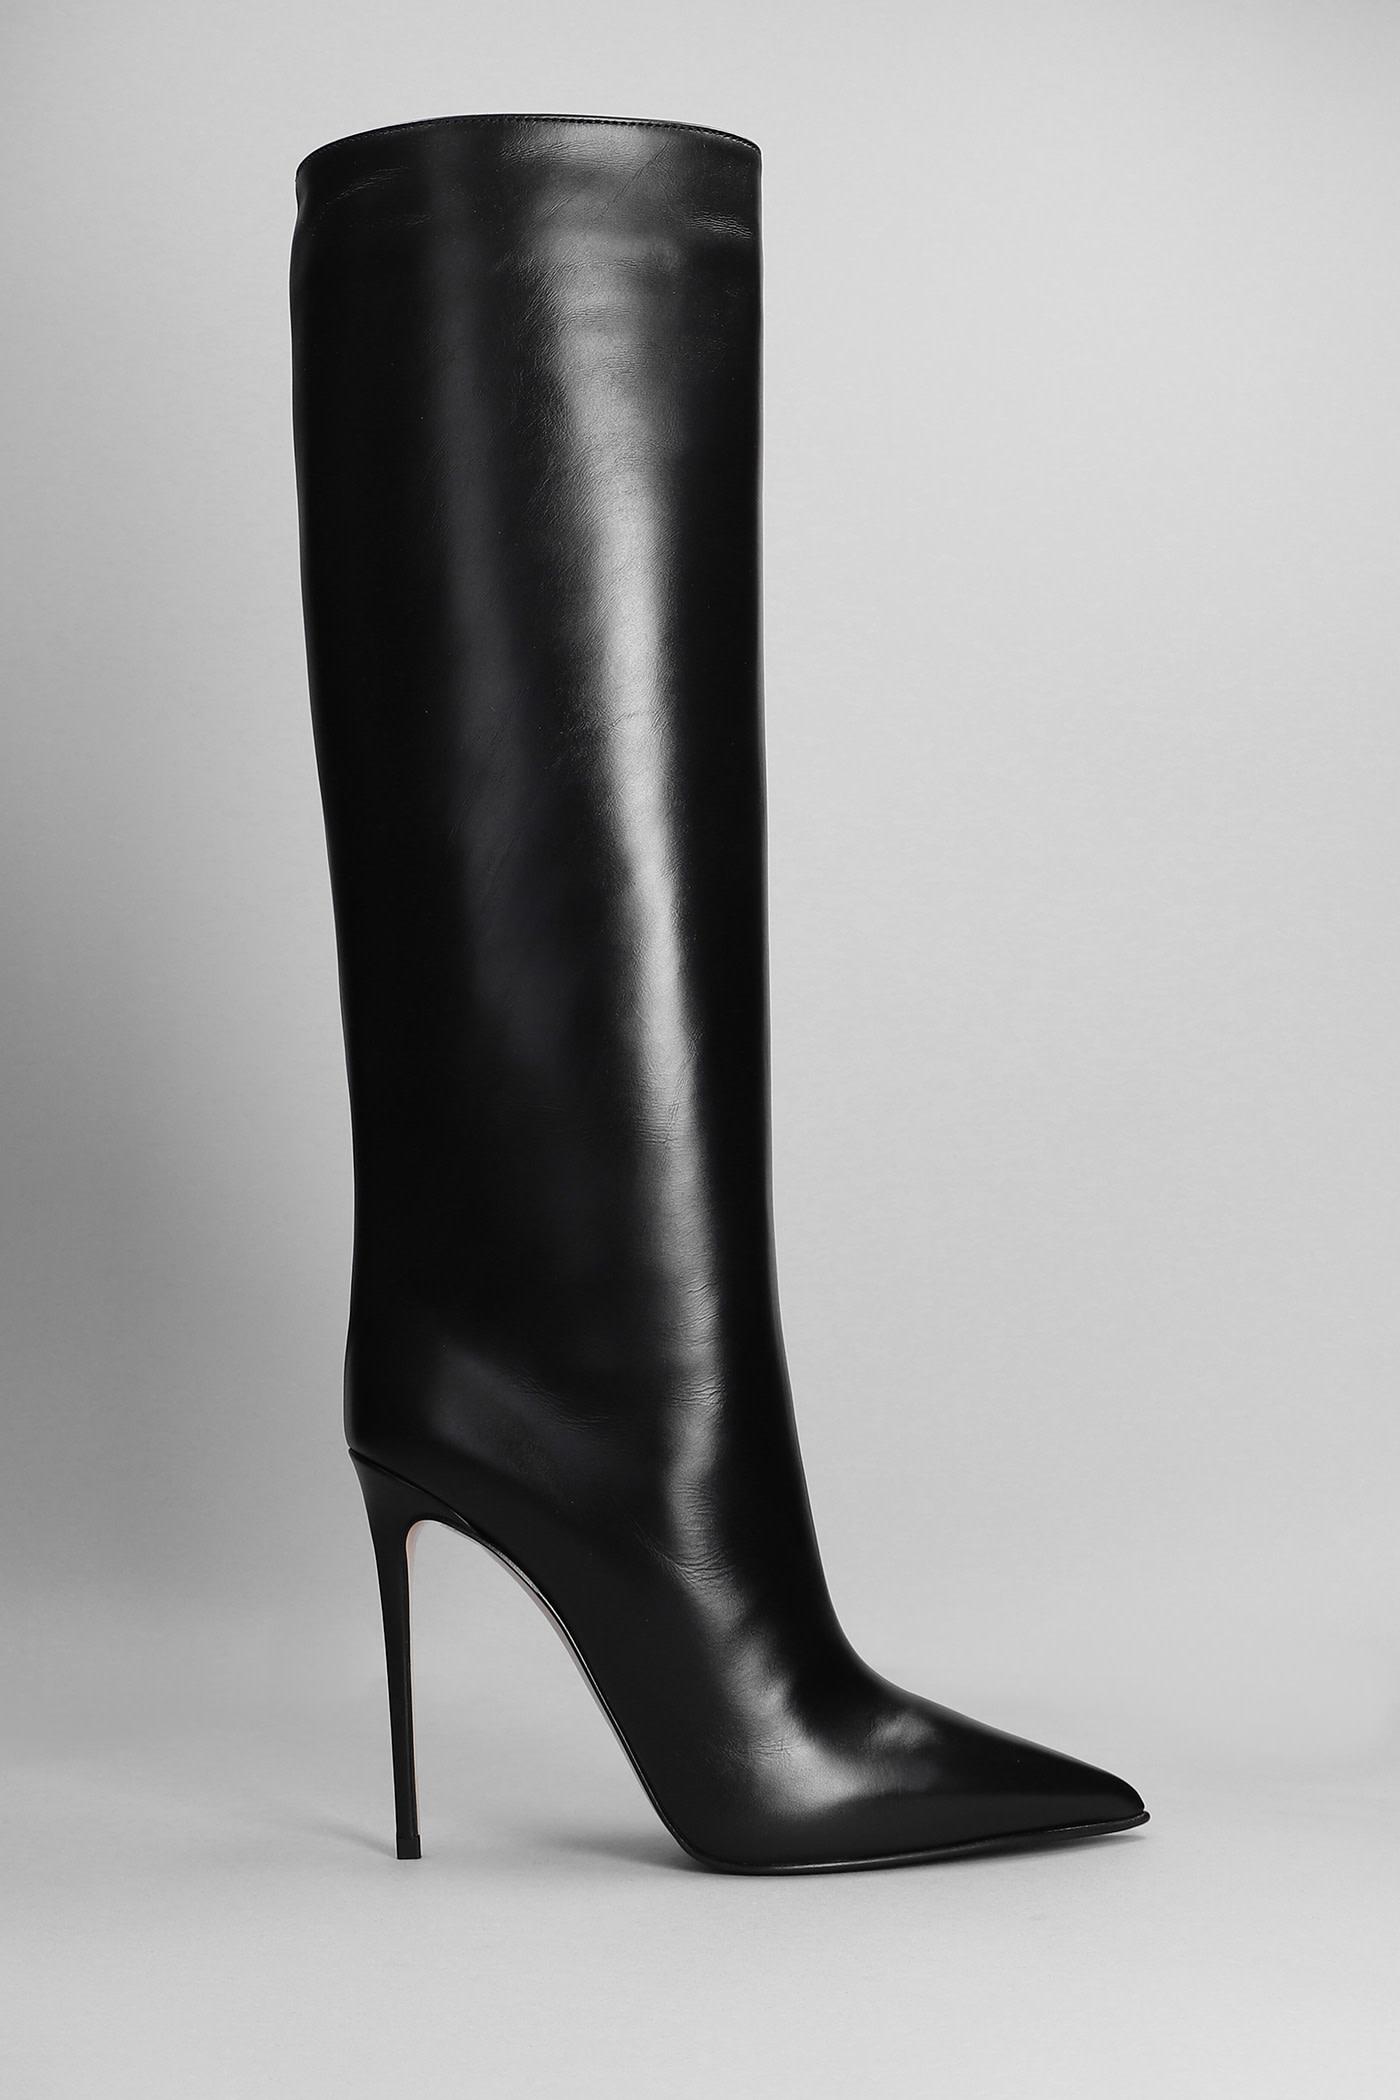 Le Silla Eva 120 High Heels Boots In Black Leather | Lyst